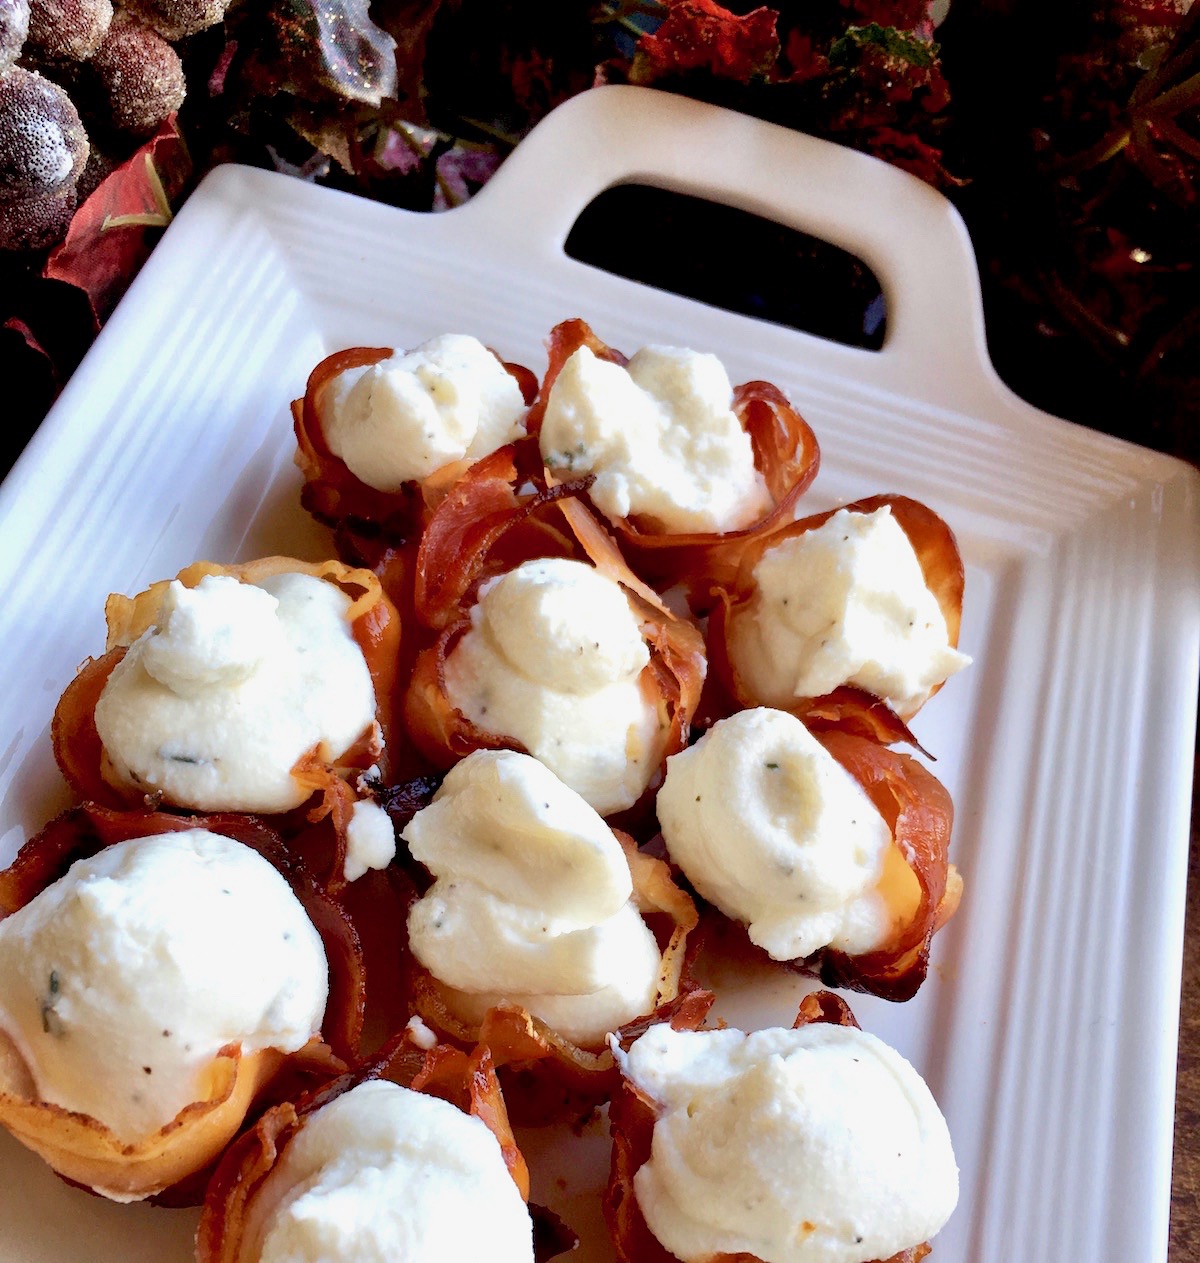 Whipped Goat Cheese and Pistachio Stuffed Prosciutto Cups